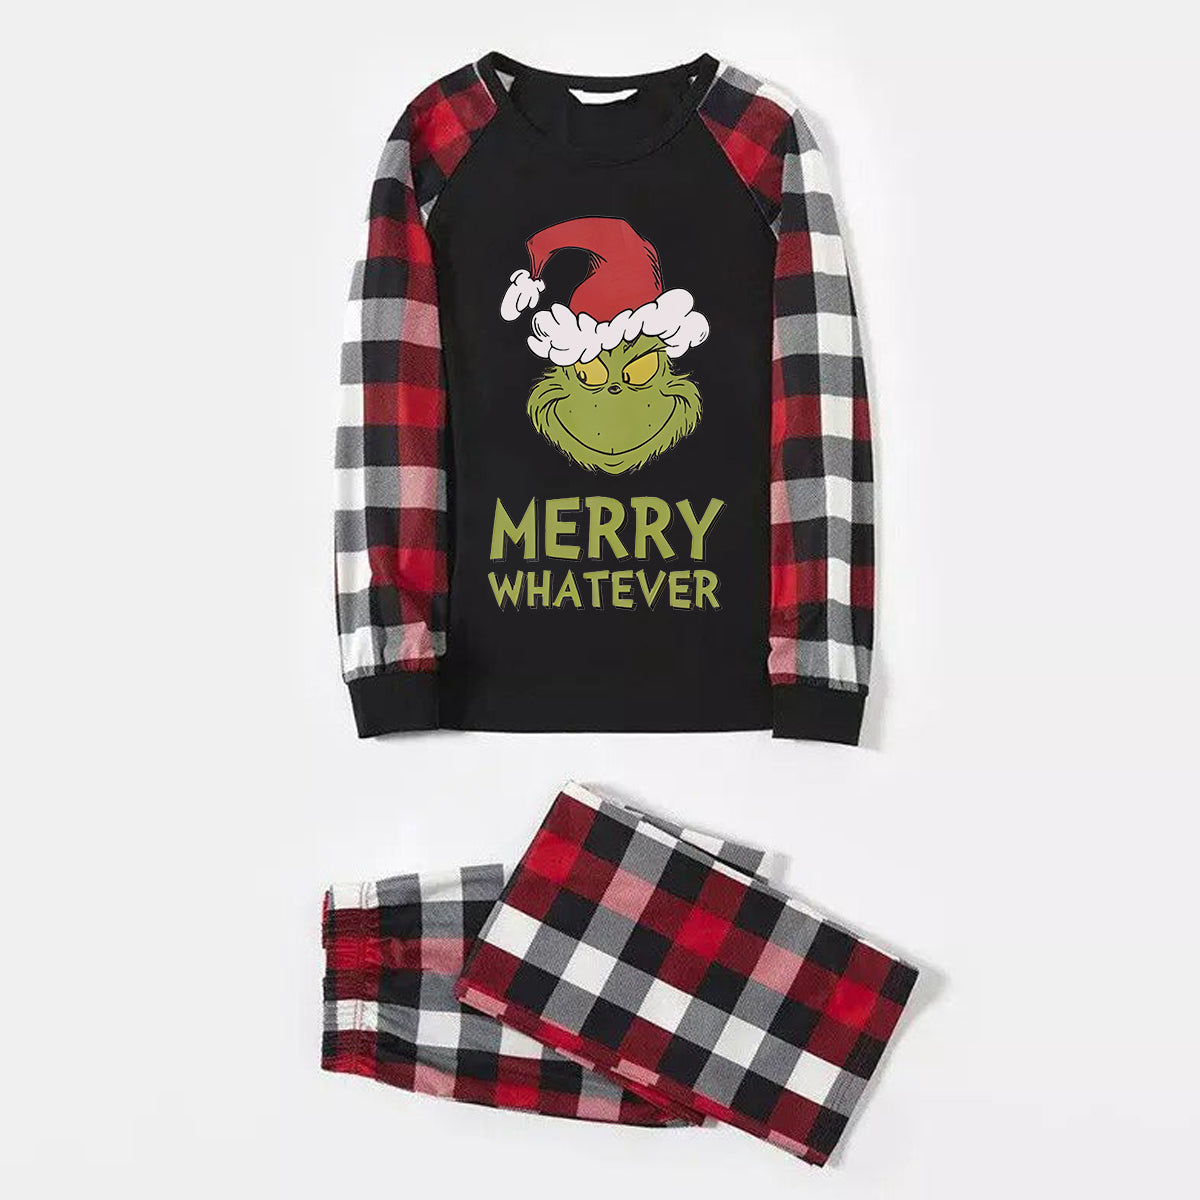 Christmas Cartoon and 'Merry Whatever' Letter Print Contrast Tops and Red & Black & White Plaid Pants Family Matching Pajamas Set With Dog Bandana